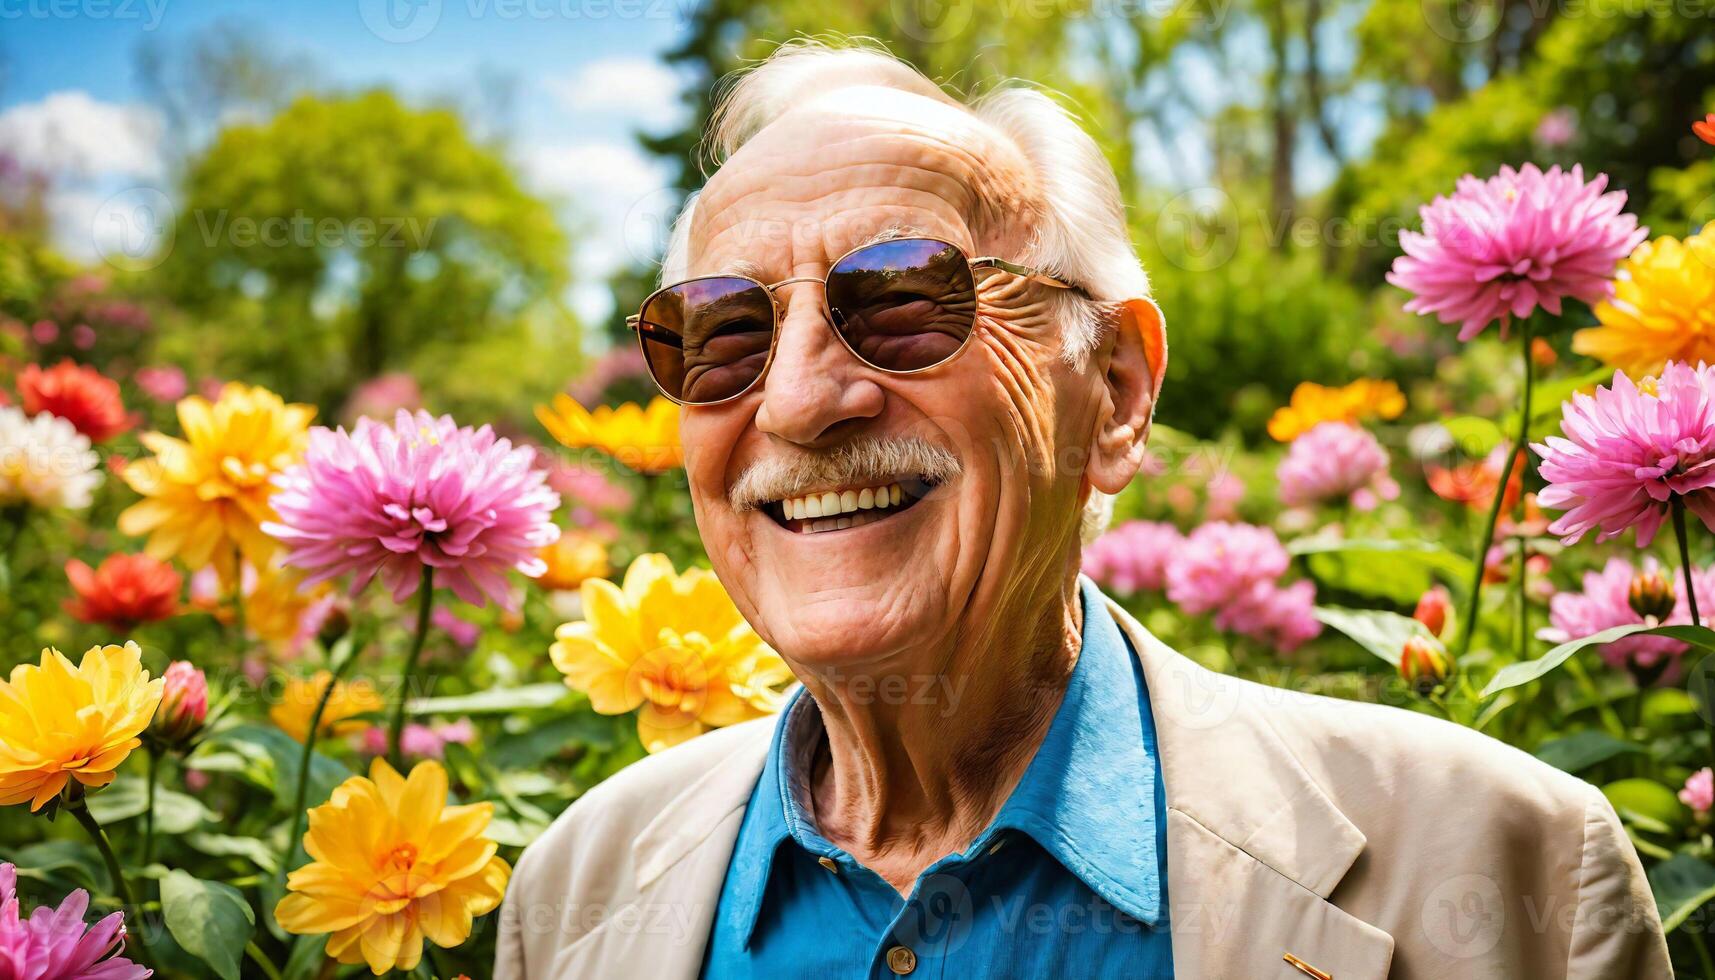 AI generated The senior man wearing sunglasses and shirt. He is standing in a garden with flowers surrounding him, generative AI photo